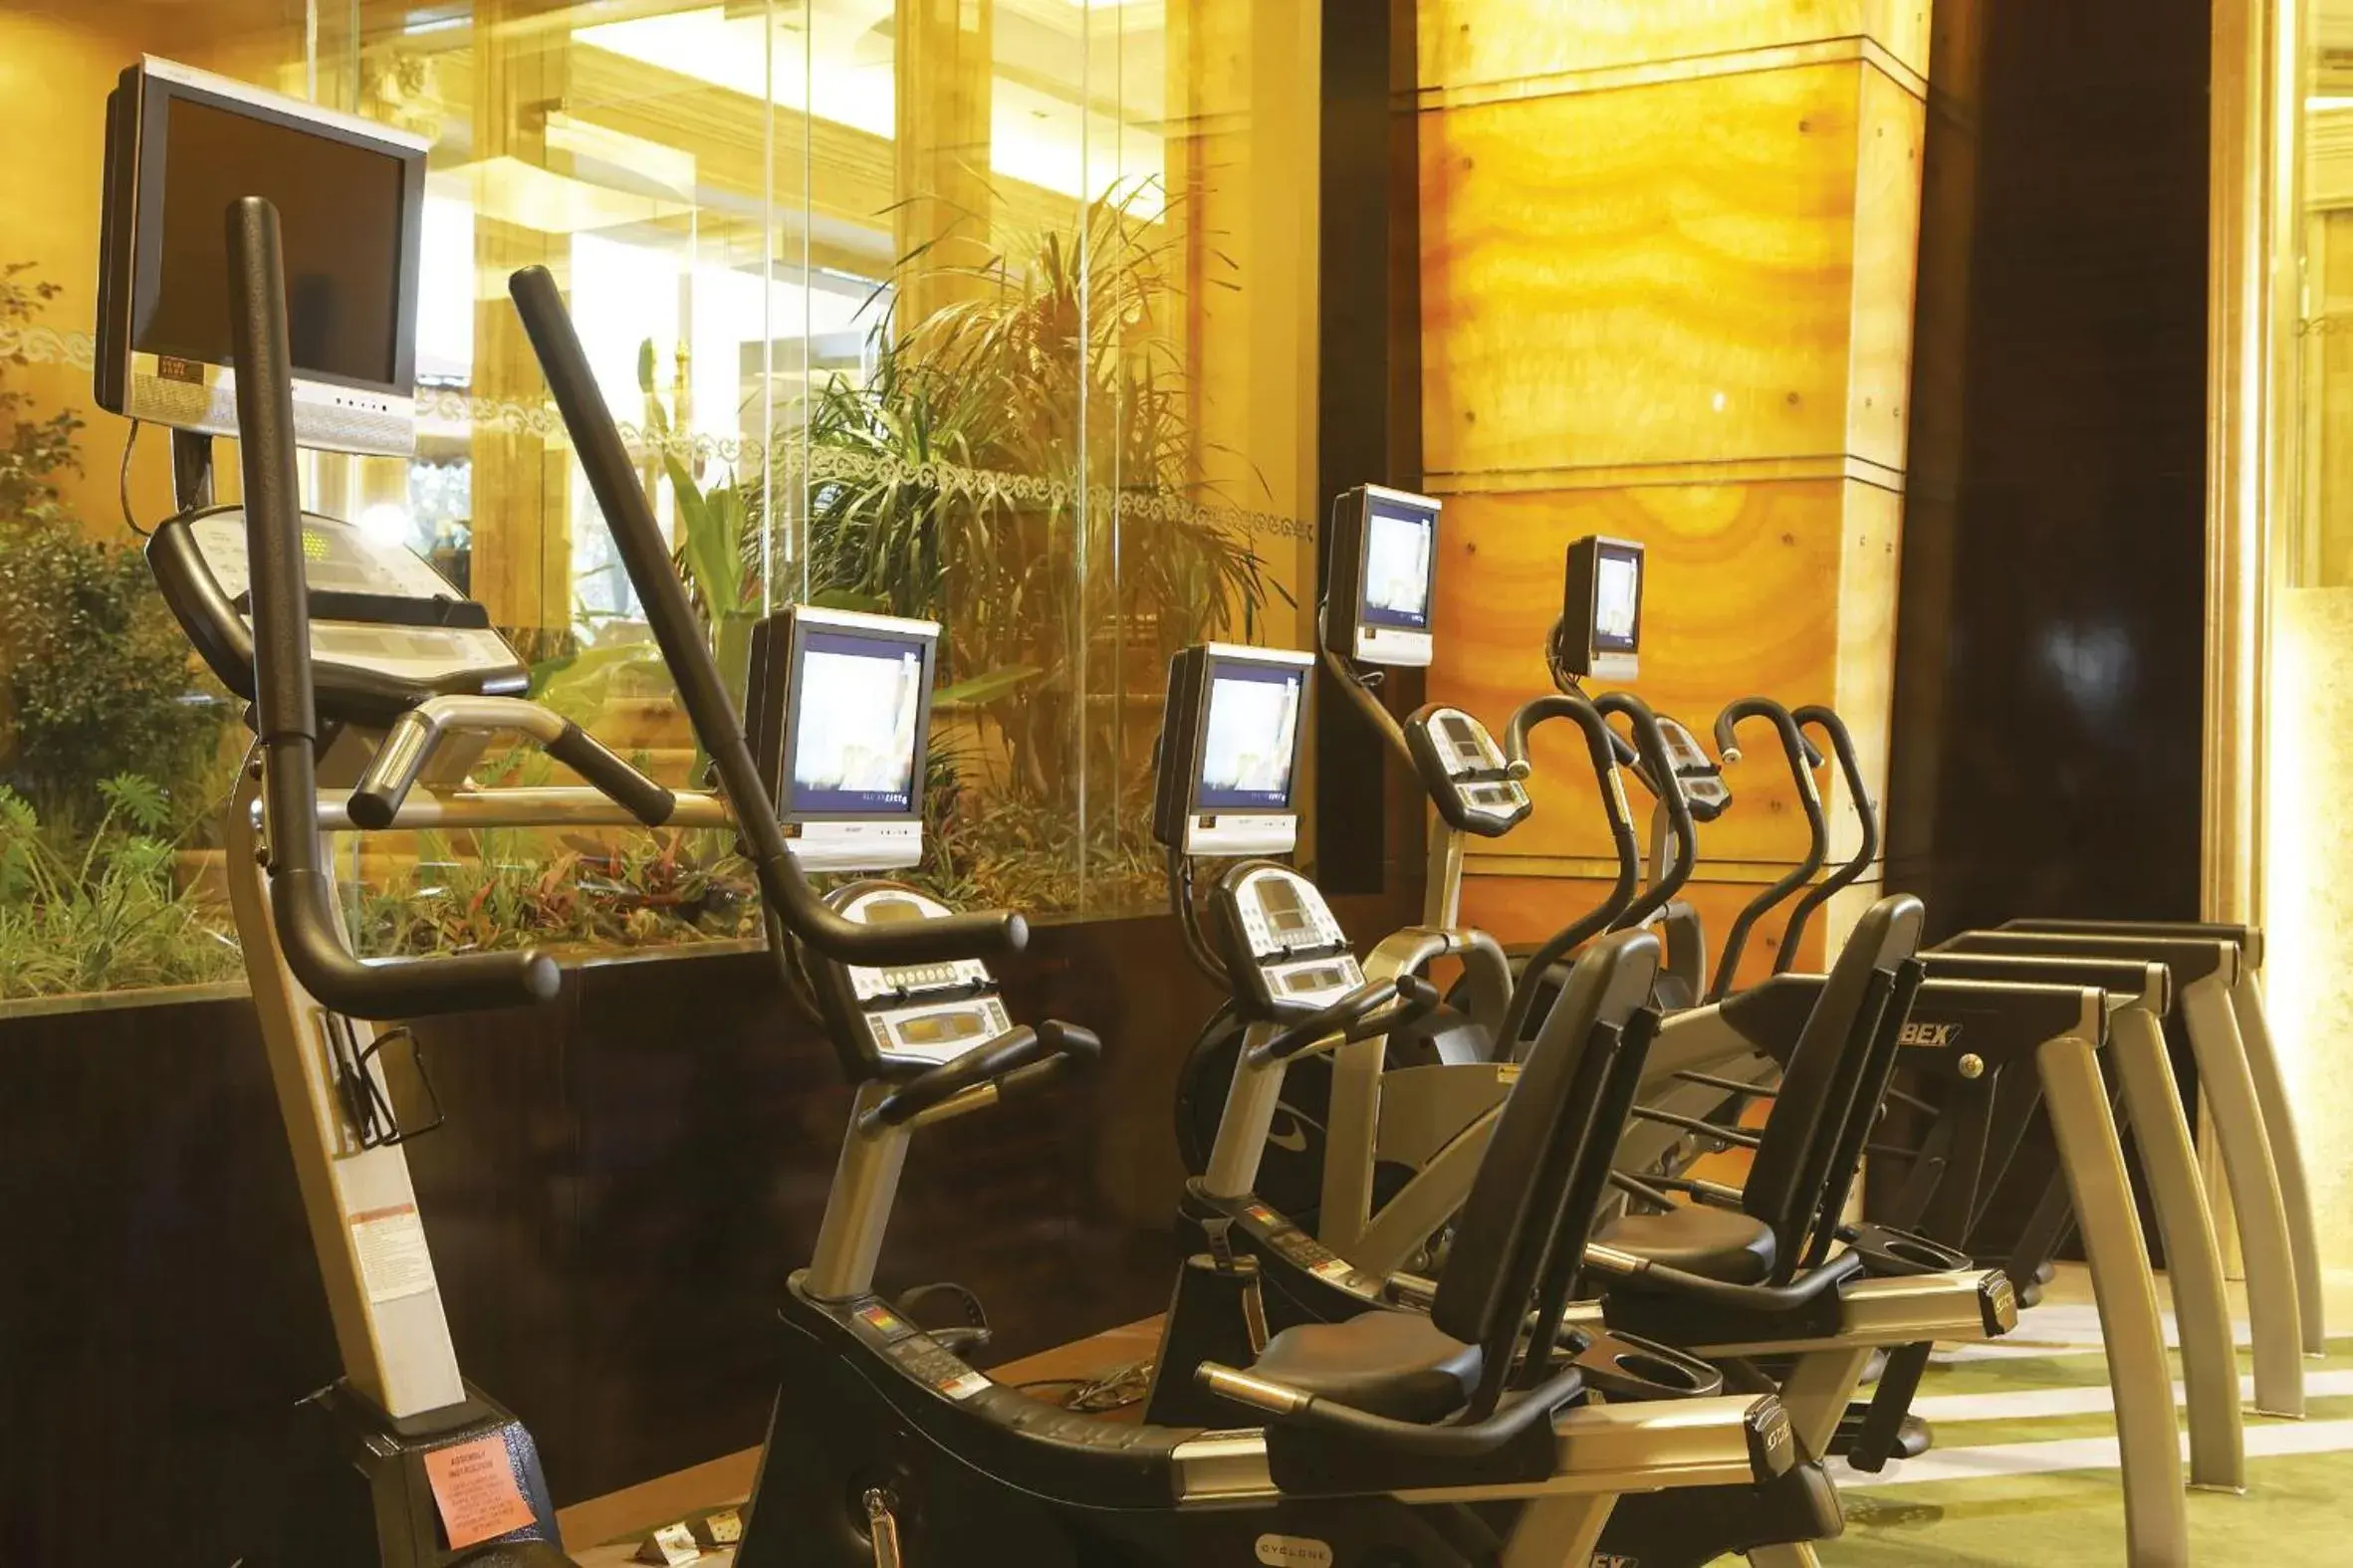 Fitness centre/facilities, Fitness Center/Facilities in Chateau Star River Guangzhou-Chateau Star River Guangzhou-Trade Fair Shuttle Bus